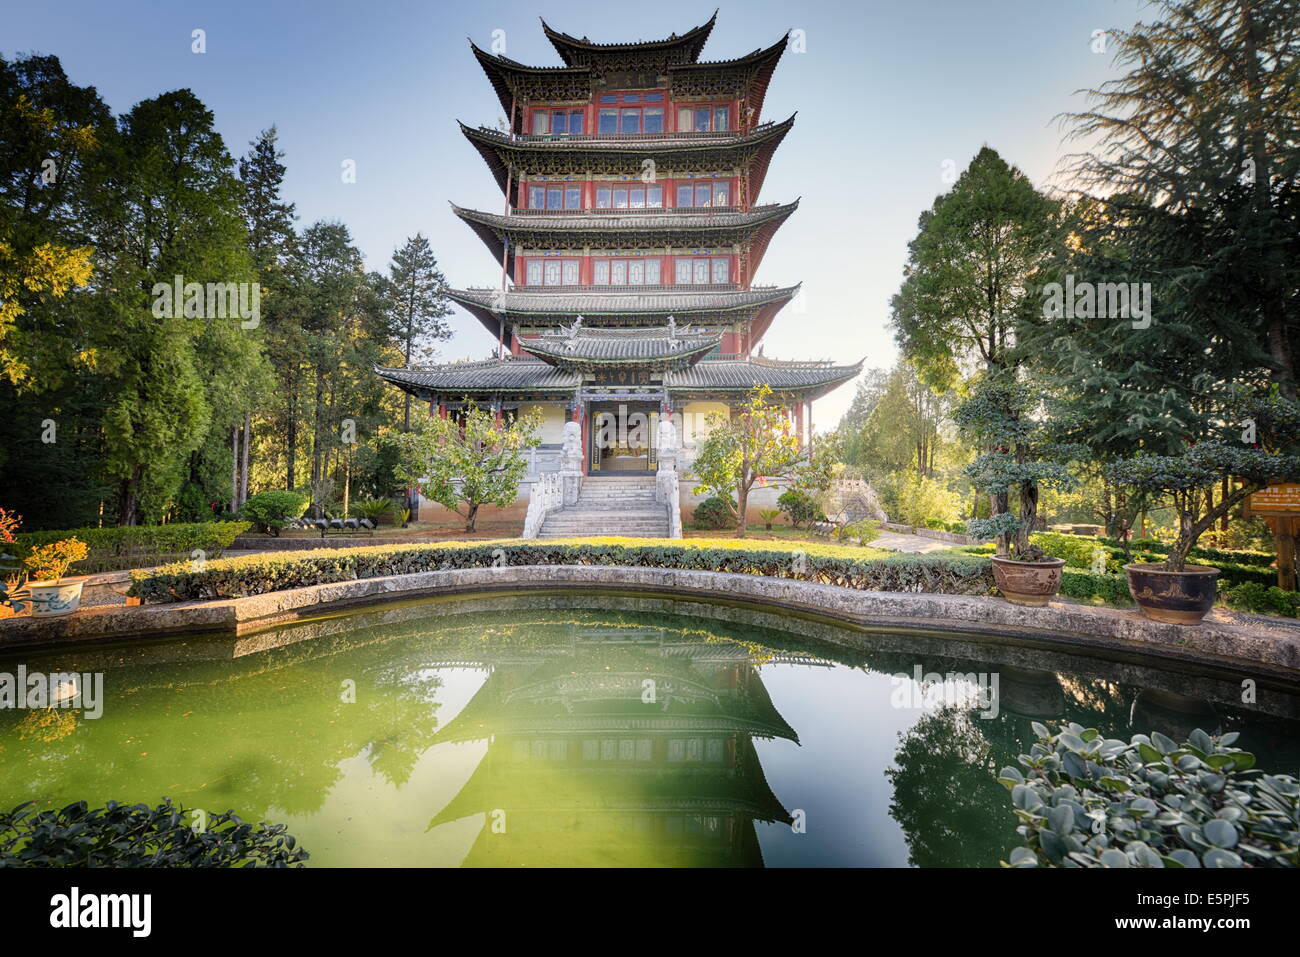 Pavilion of Everlasting Clarity with emerald pool, Lijiang, Yunnan, China, Asia Stock Photo